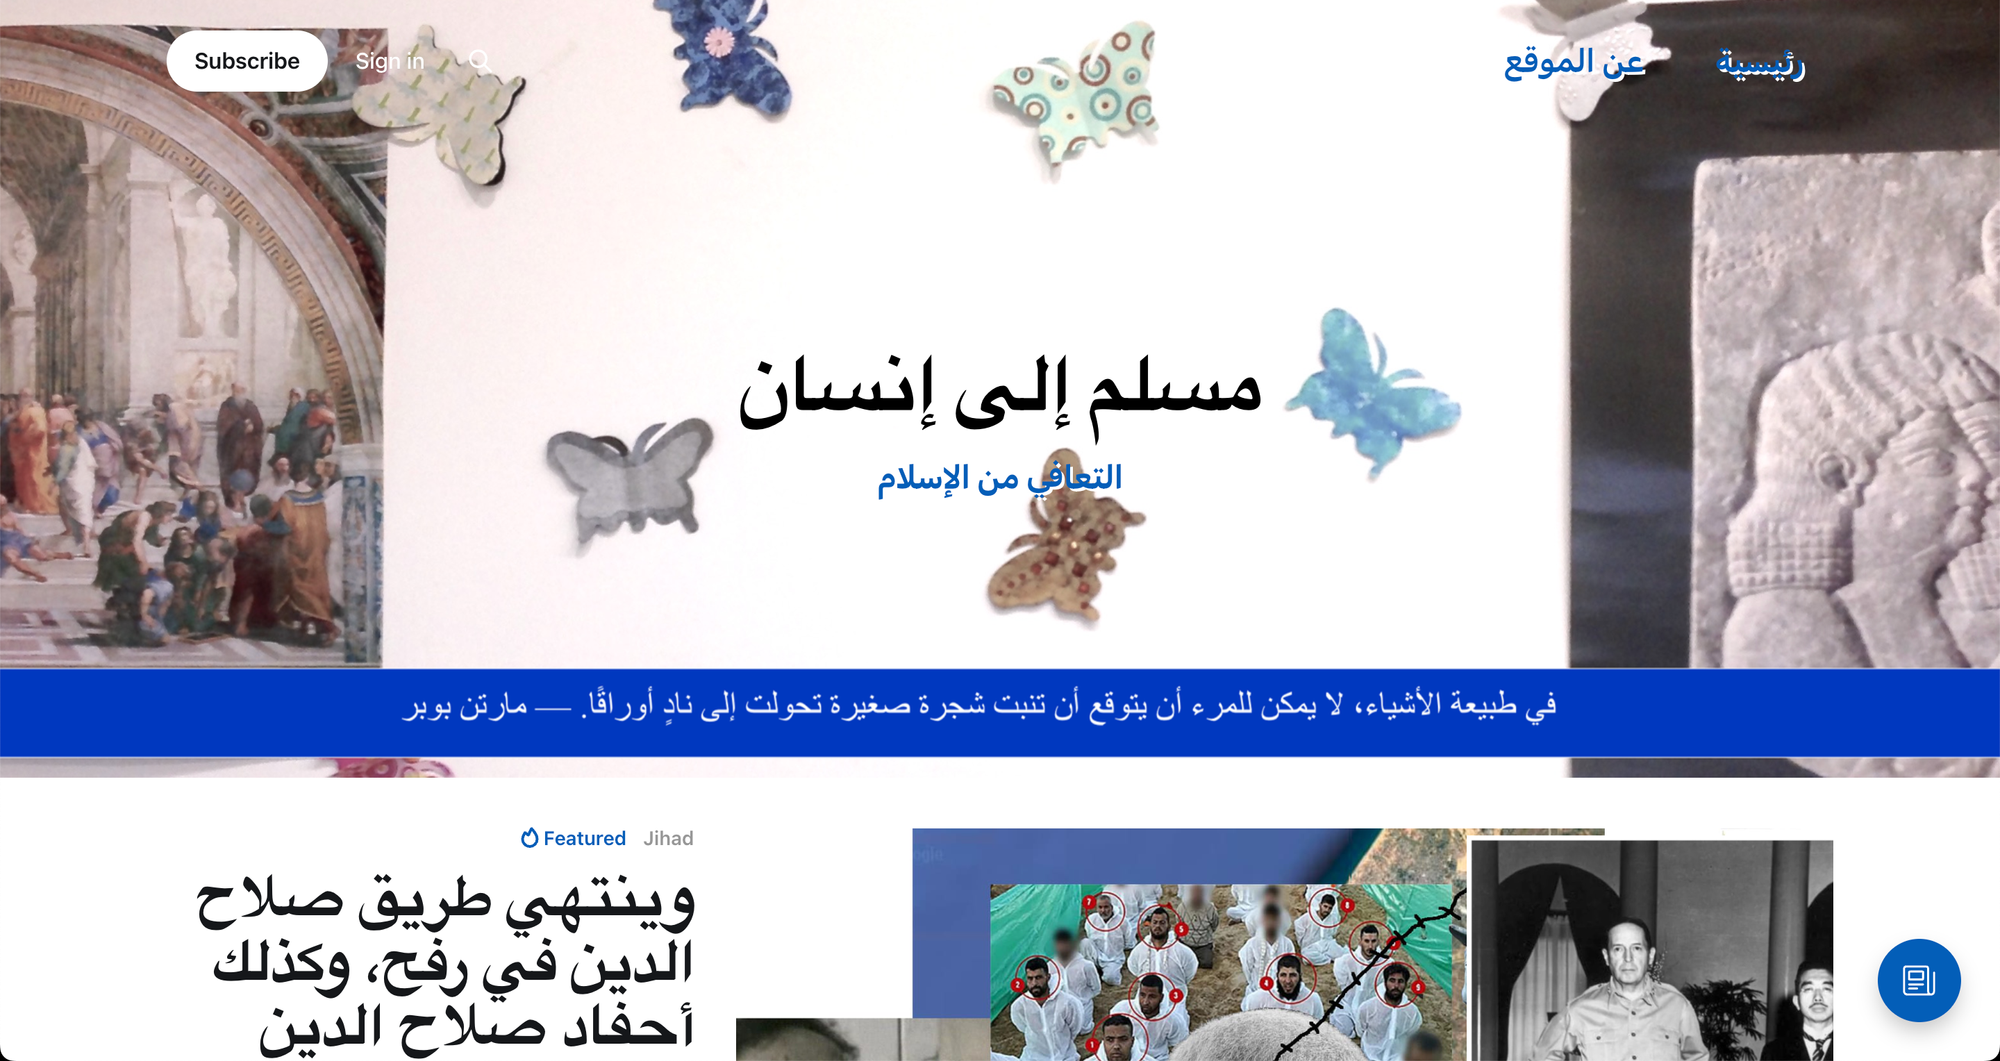 Arabic sister site, مسلم إلى إنسان, launched